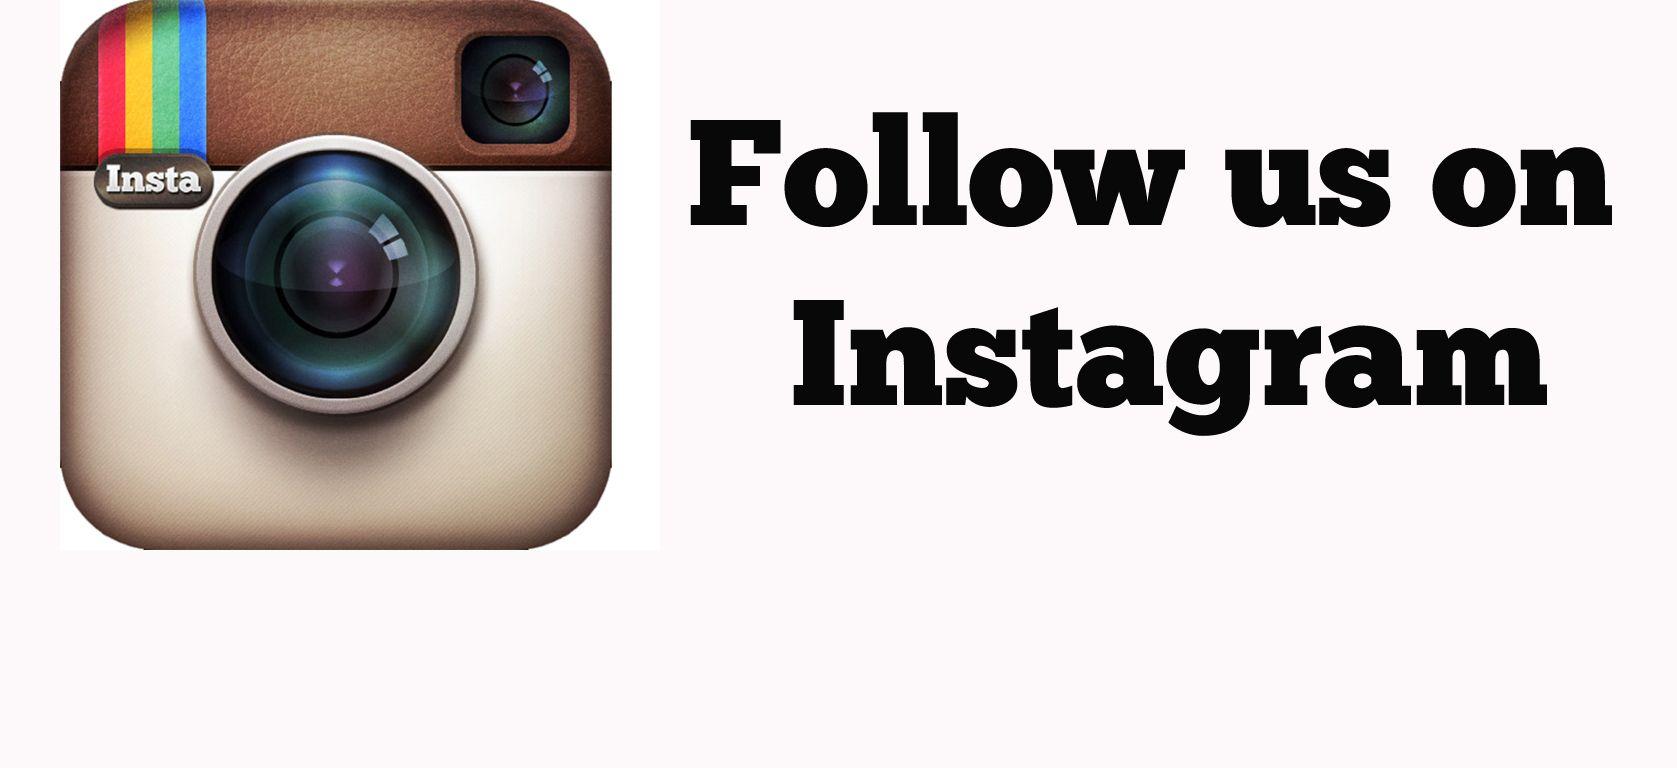 Like Us On Instagram Logo - 3 Reasons Why Public Health Organizations Need To Be On Instagram ...